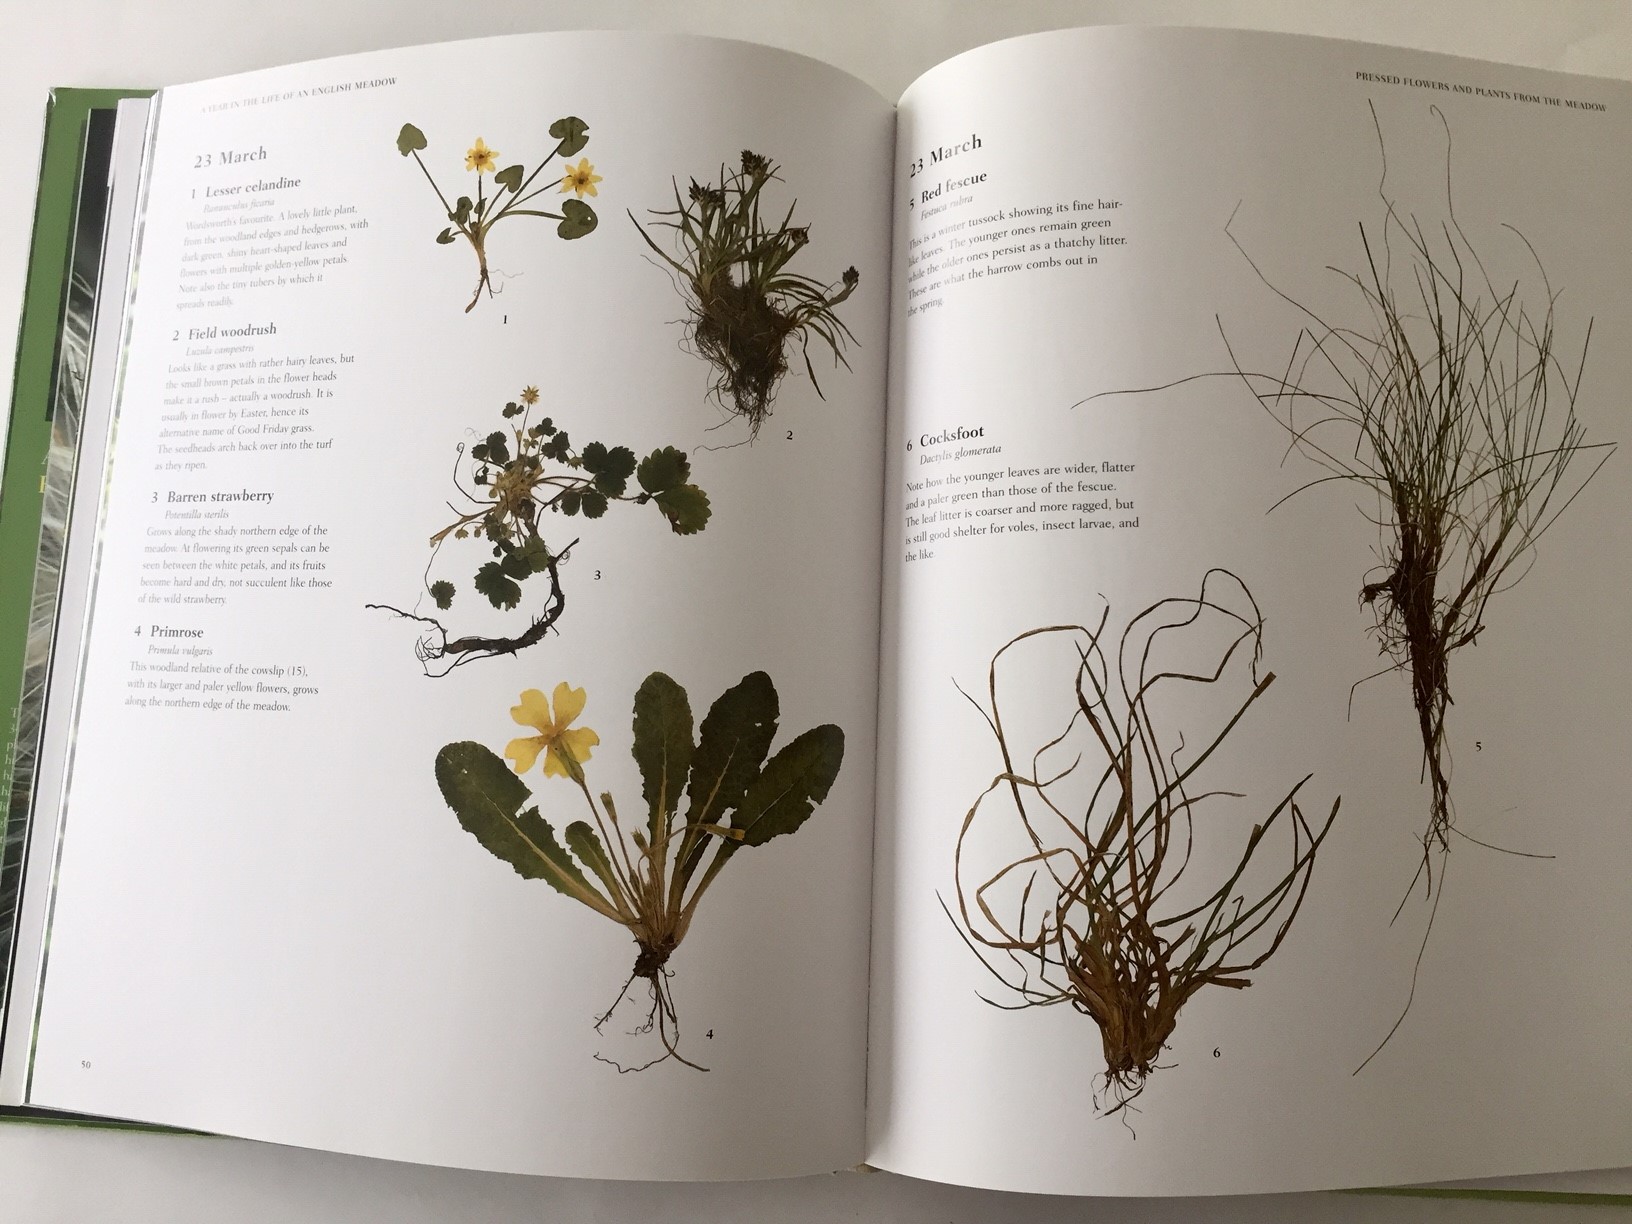 A Year in the Life of an English Meadow, photographs of pressed plants